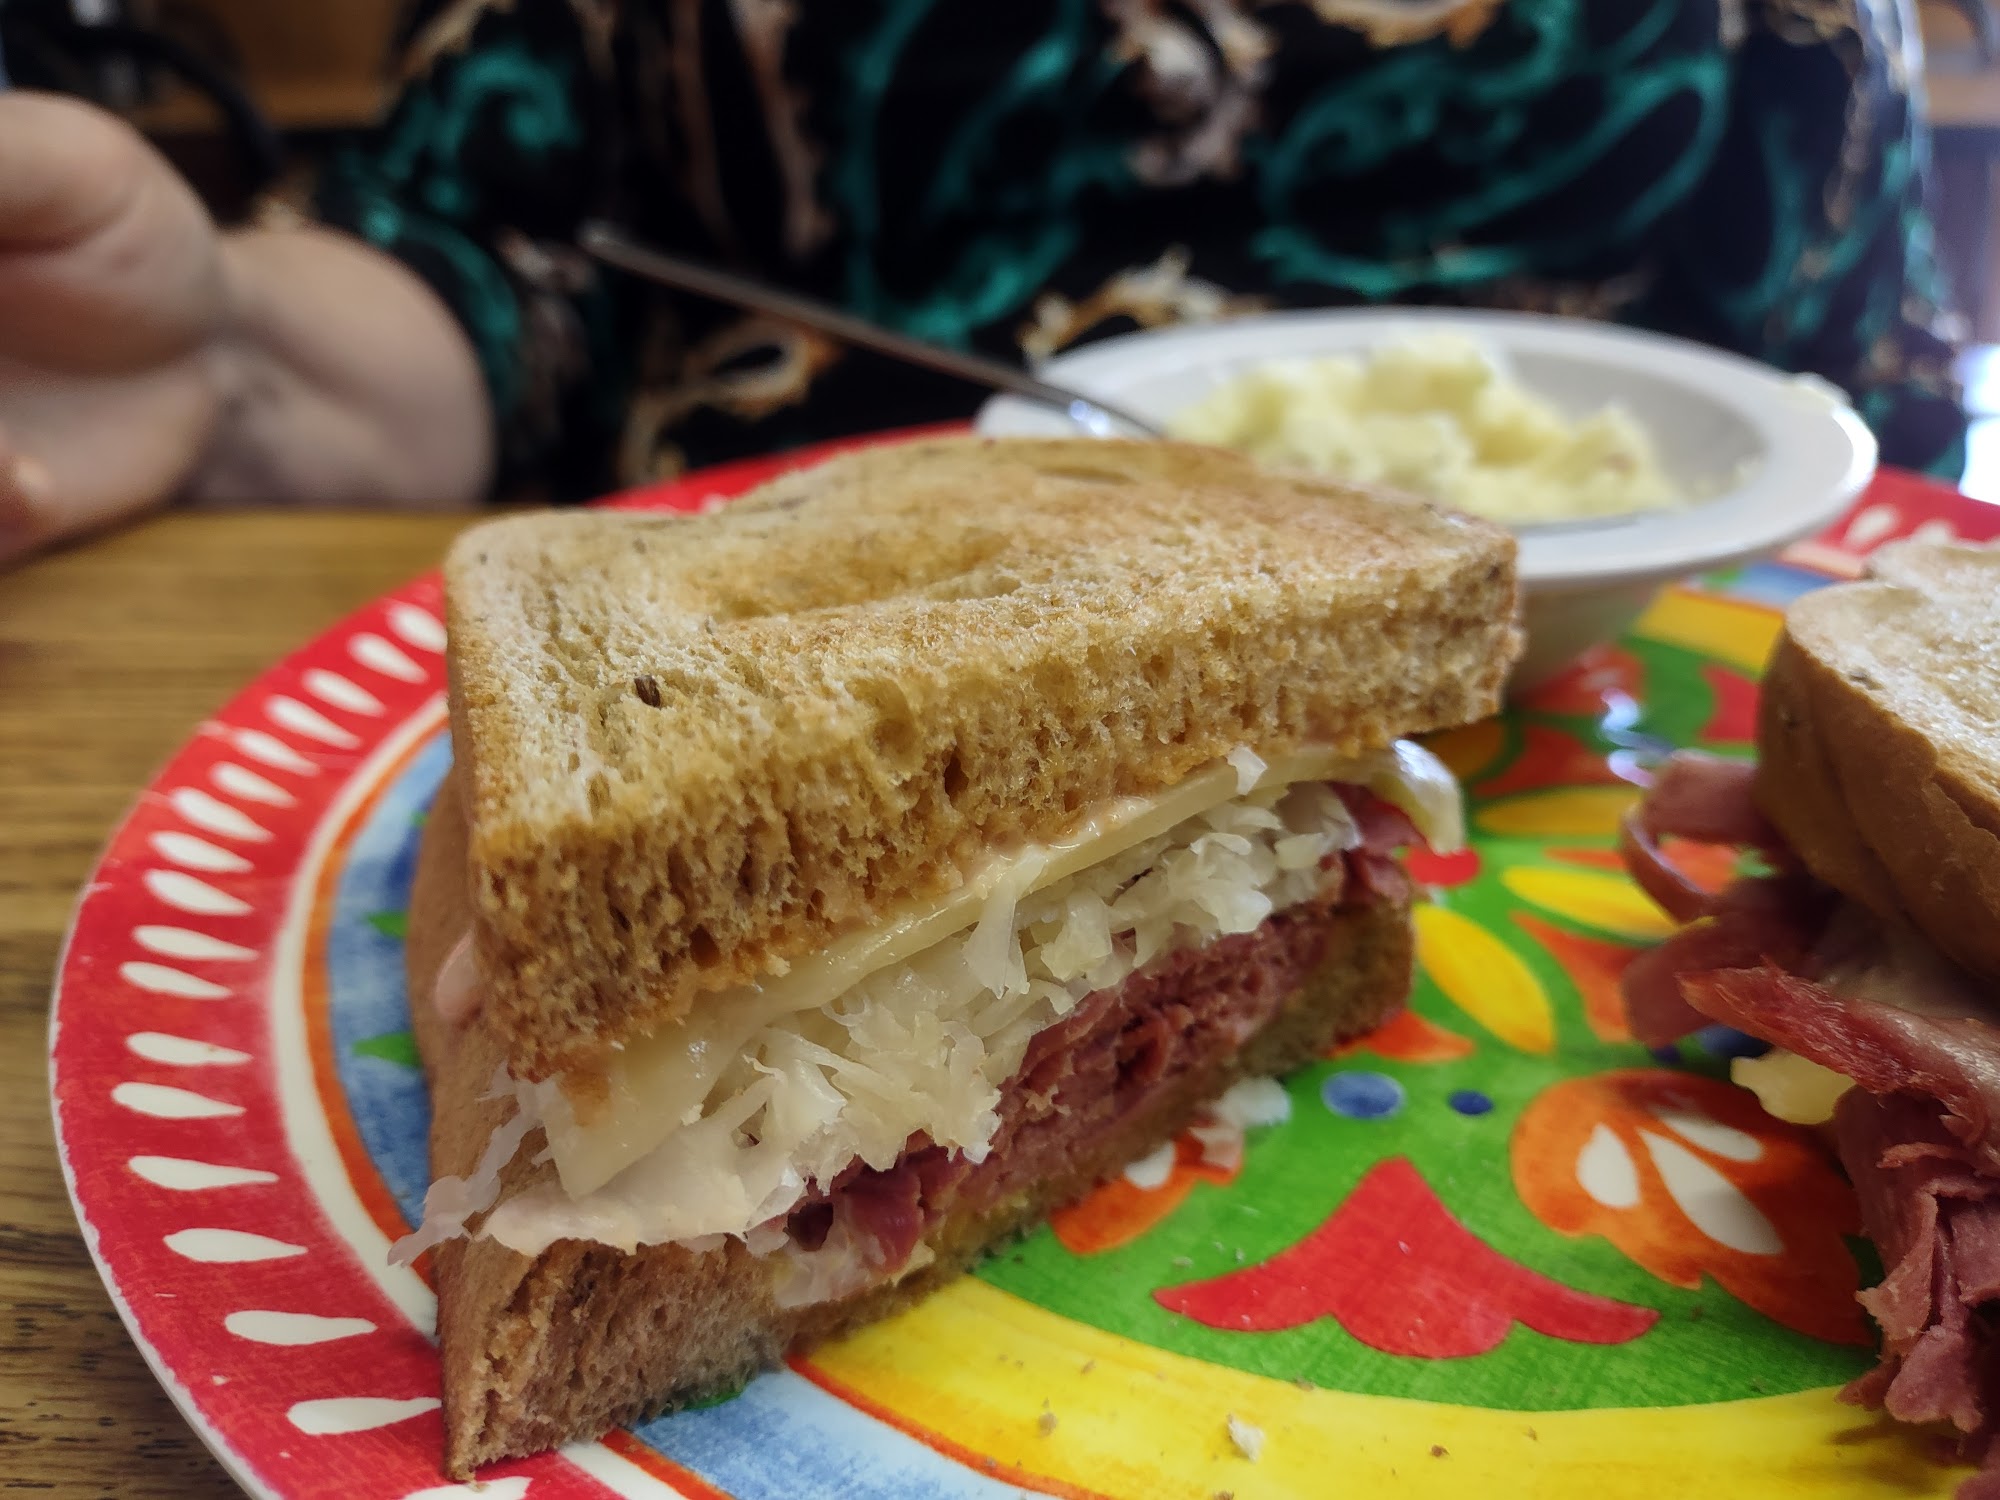 The Smokehouse Deli of Russellville